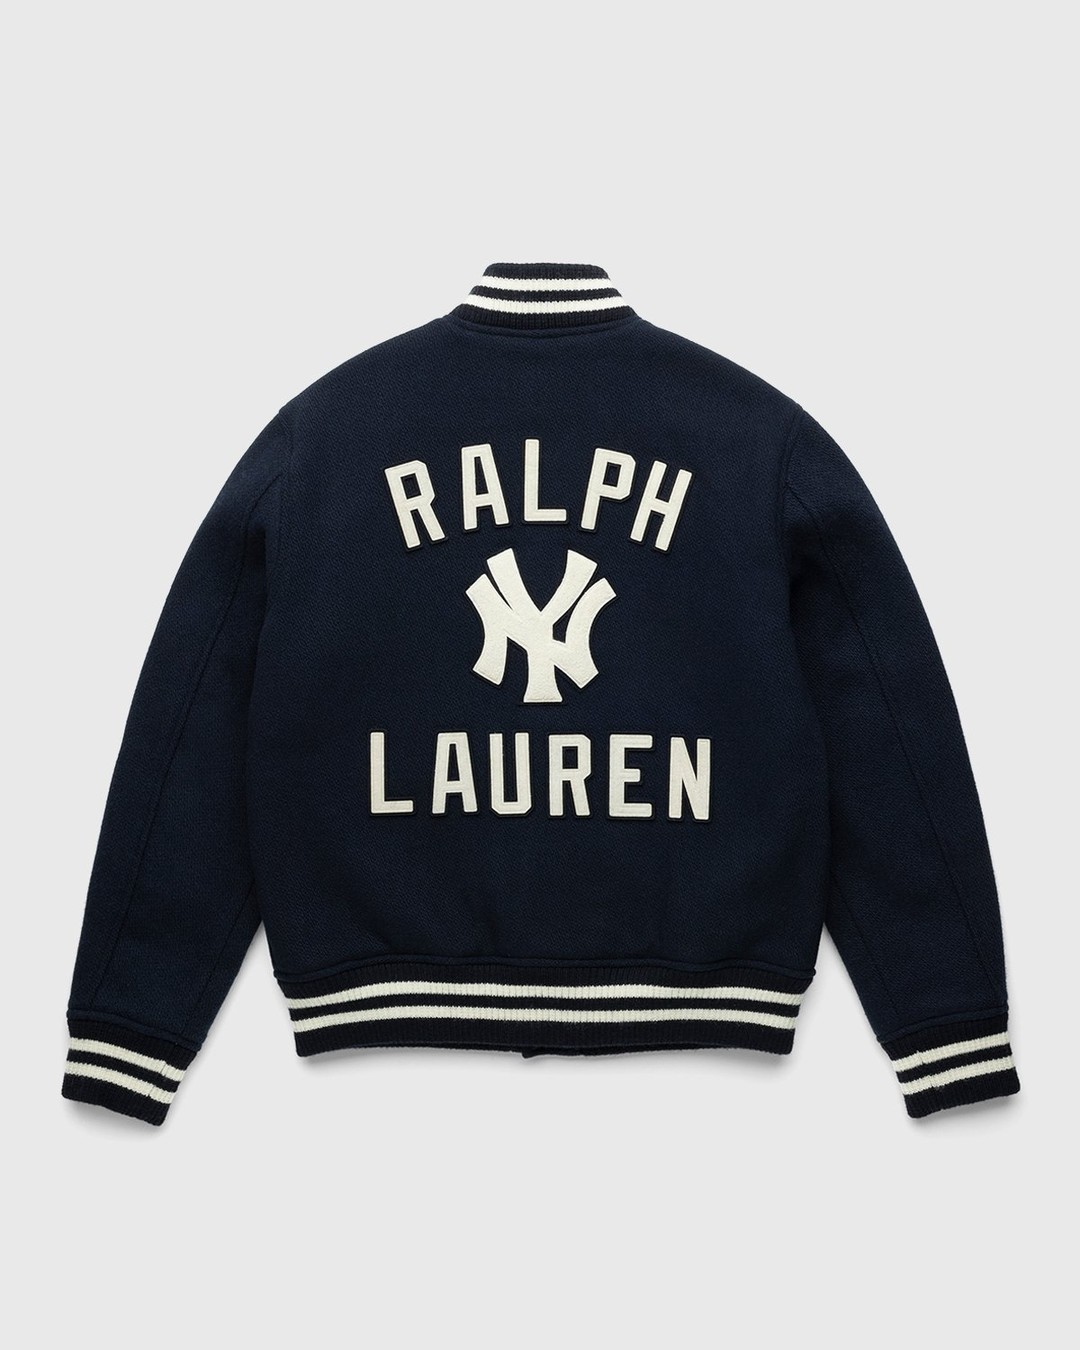 Maker of Jacket Fashion Jackets Polo Ralph Lauren Red New York Yankees